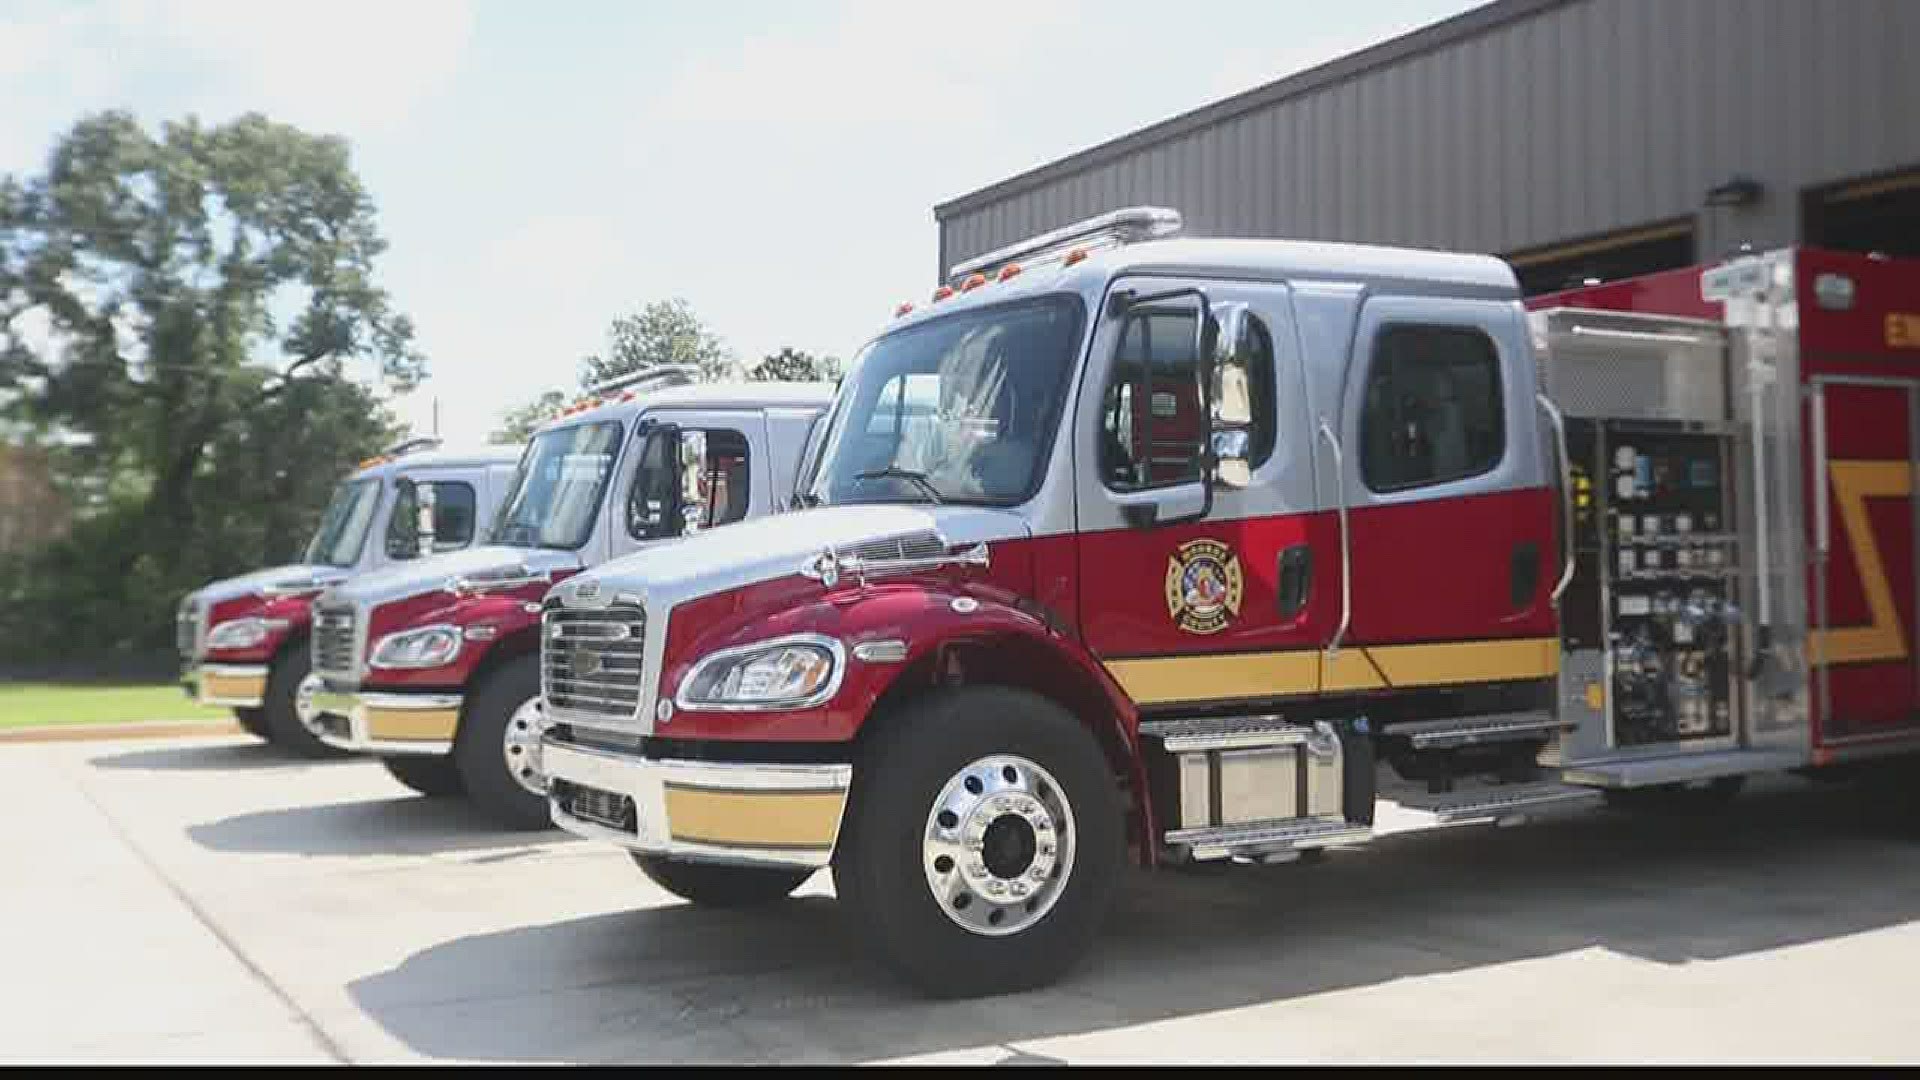 The new trucks have upgraded equipment and can hold up to 1,000 gallons of water.